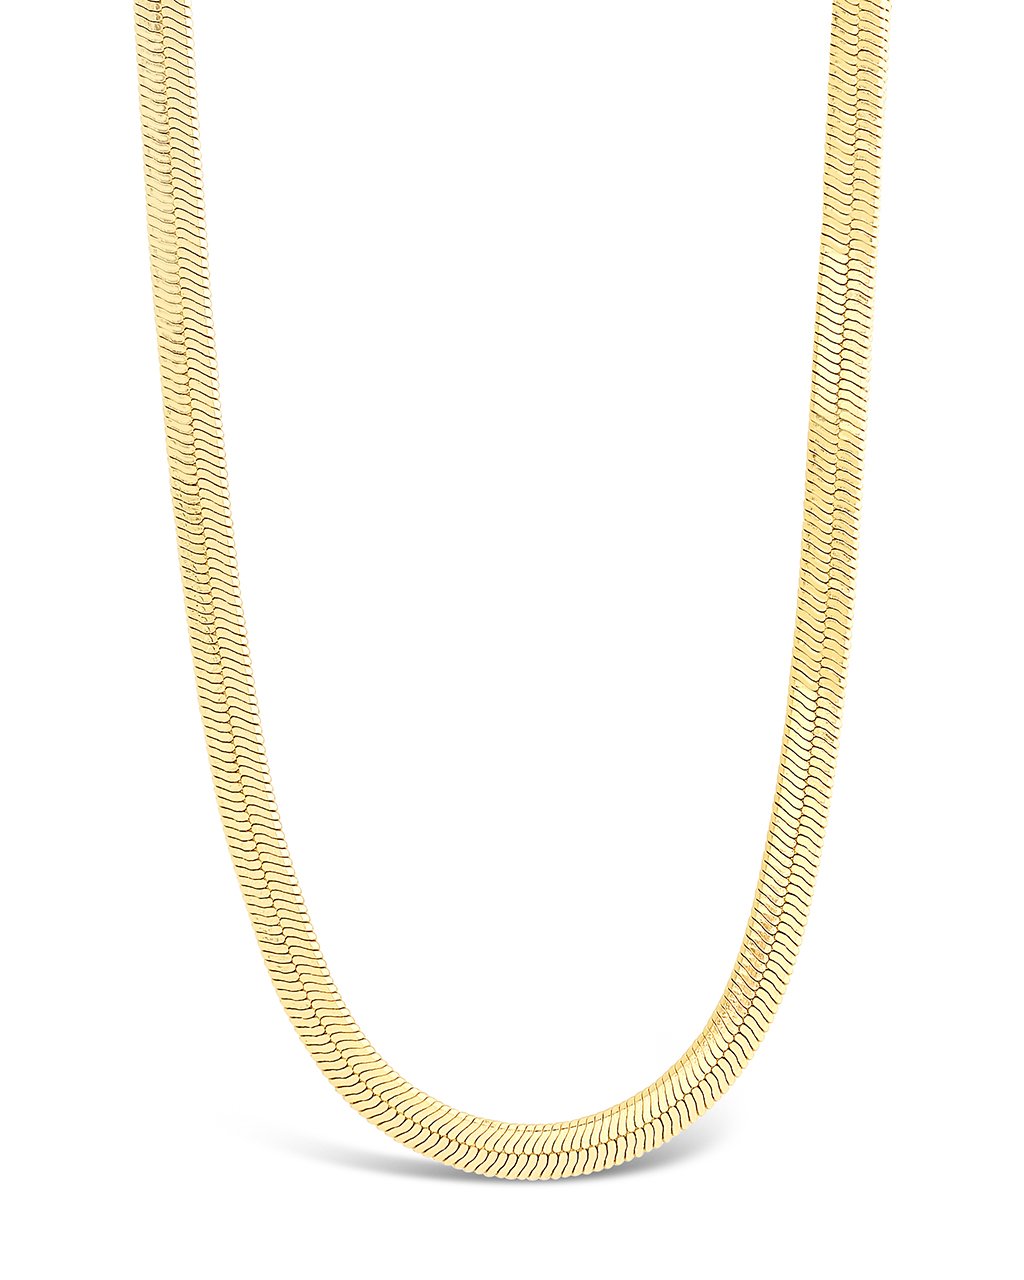 Sterling Forever Herringbone Chain Necklace Silver : One Size